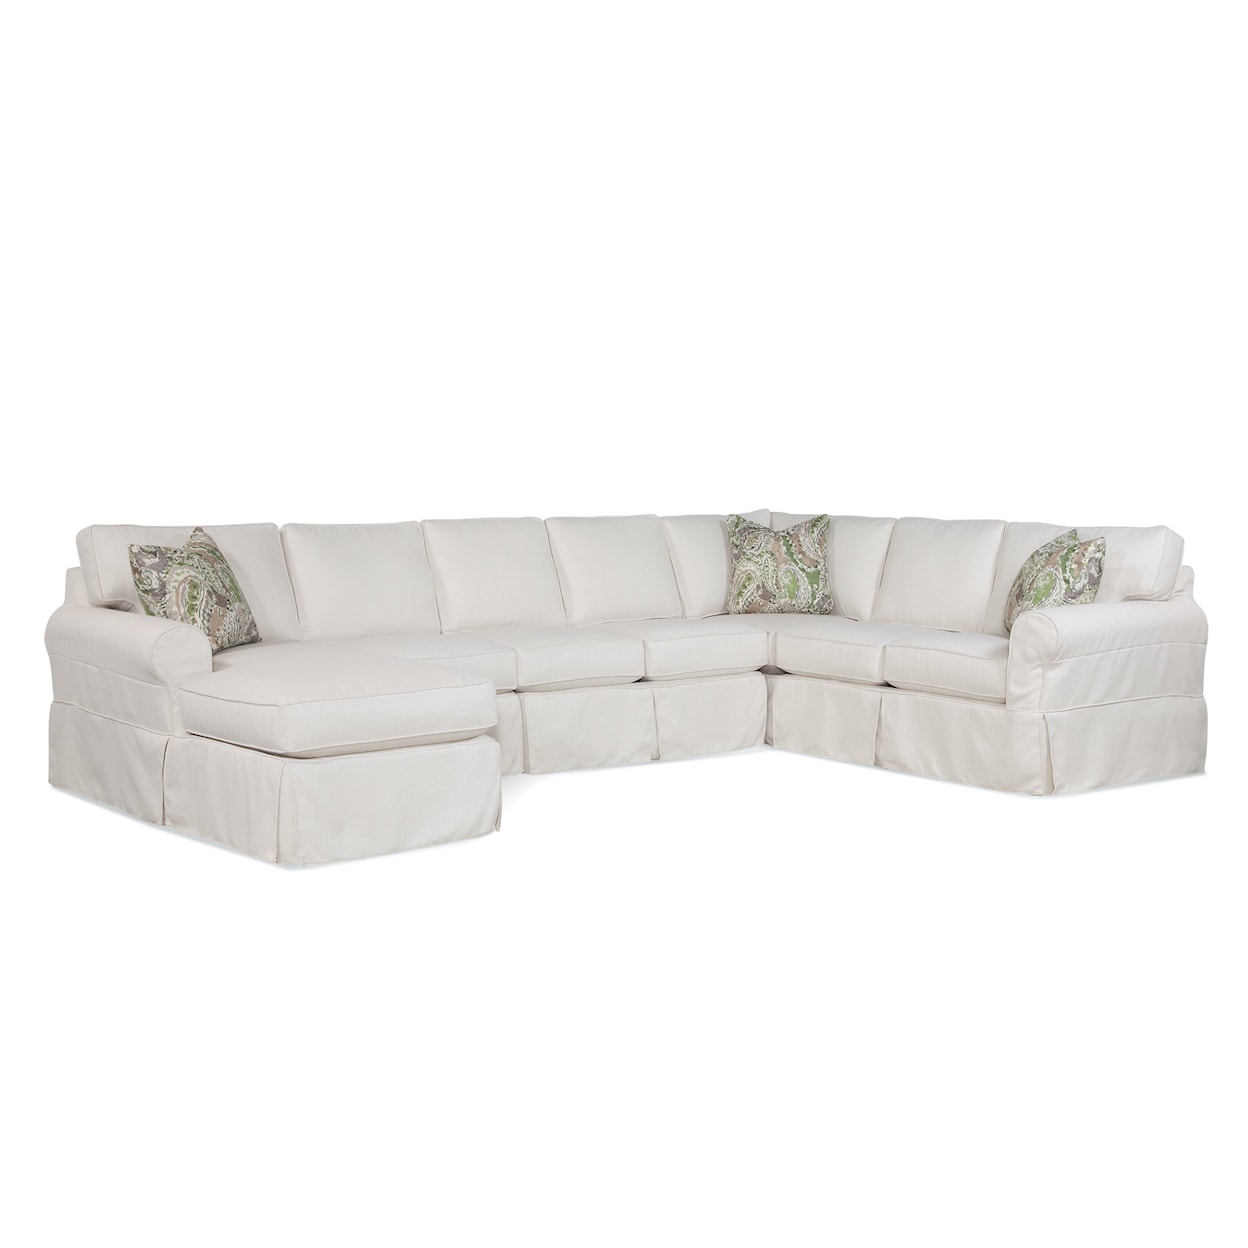 Braxton Culler Bedford Bedford Four-Piece Chaise Sectional